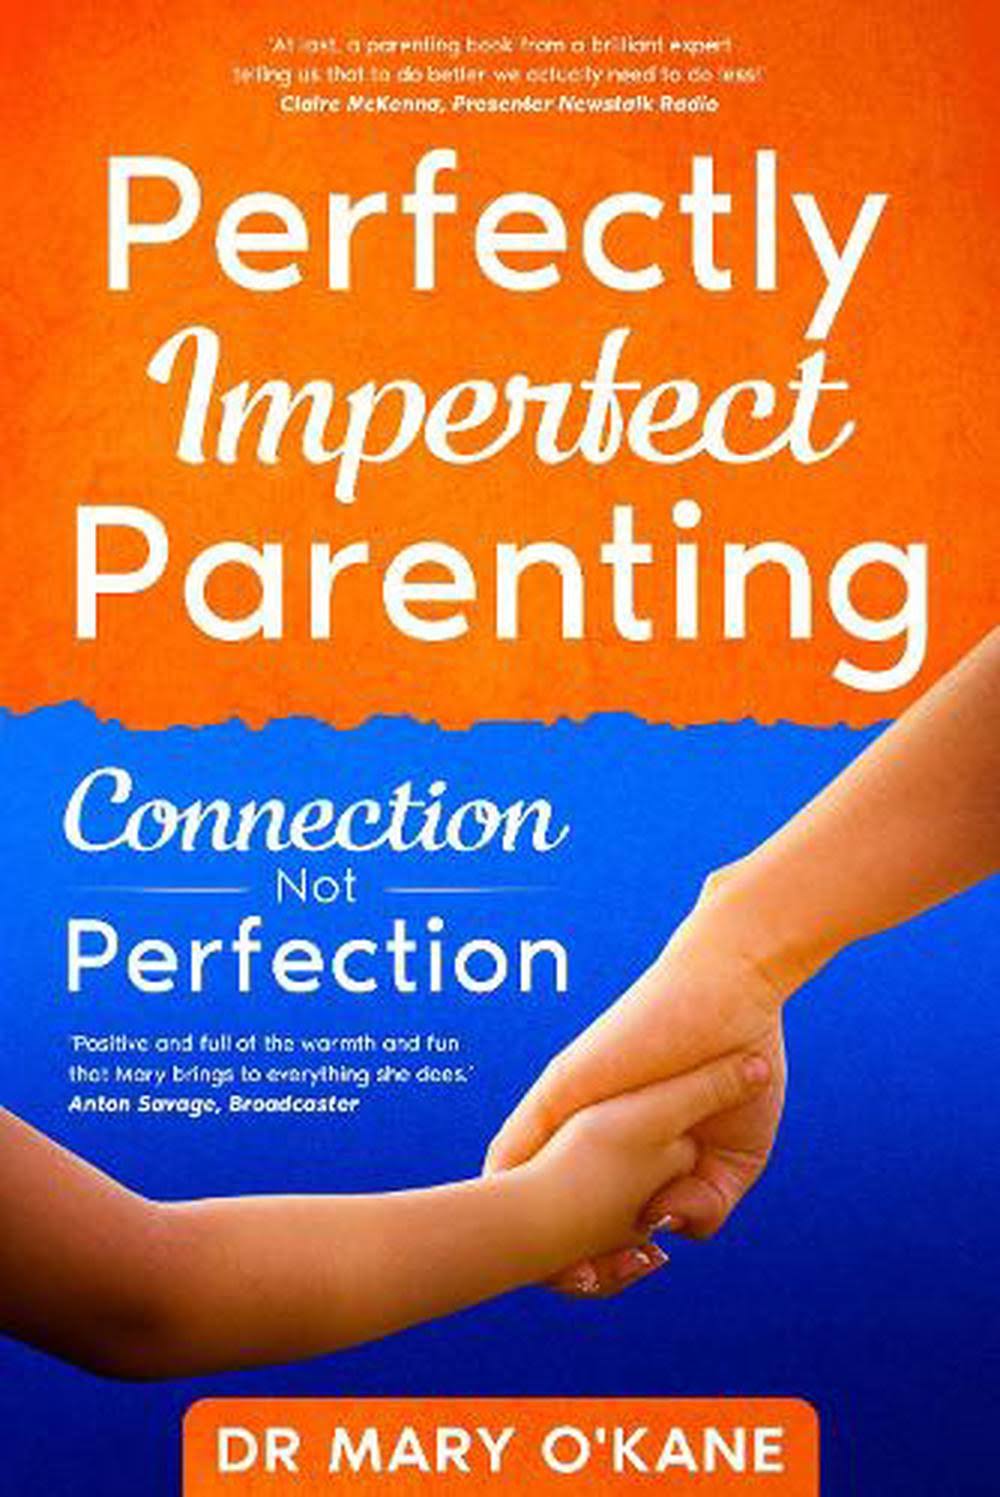 Perfectly Imperfect Parenting: Connection Not Perfection [Book]